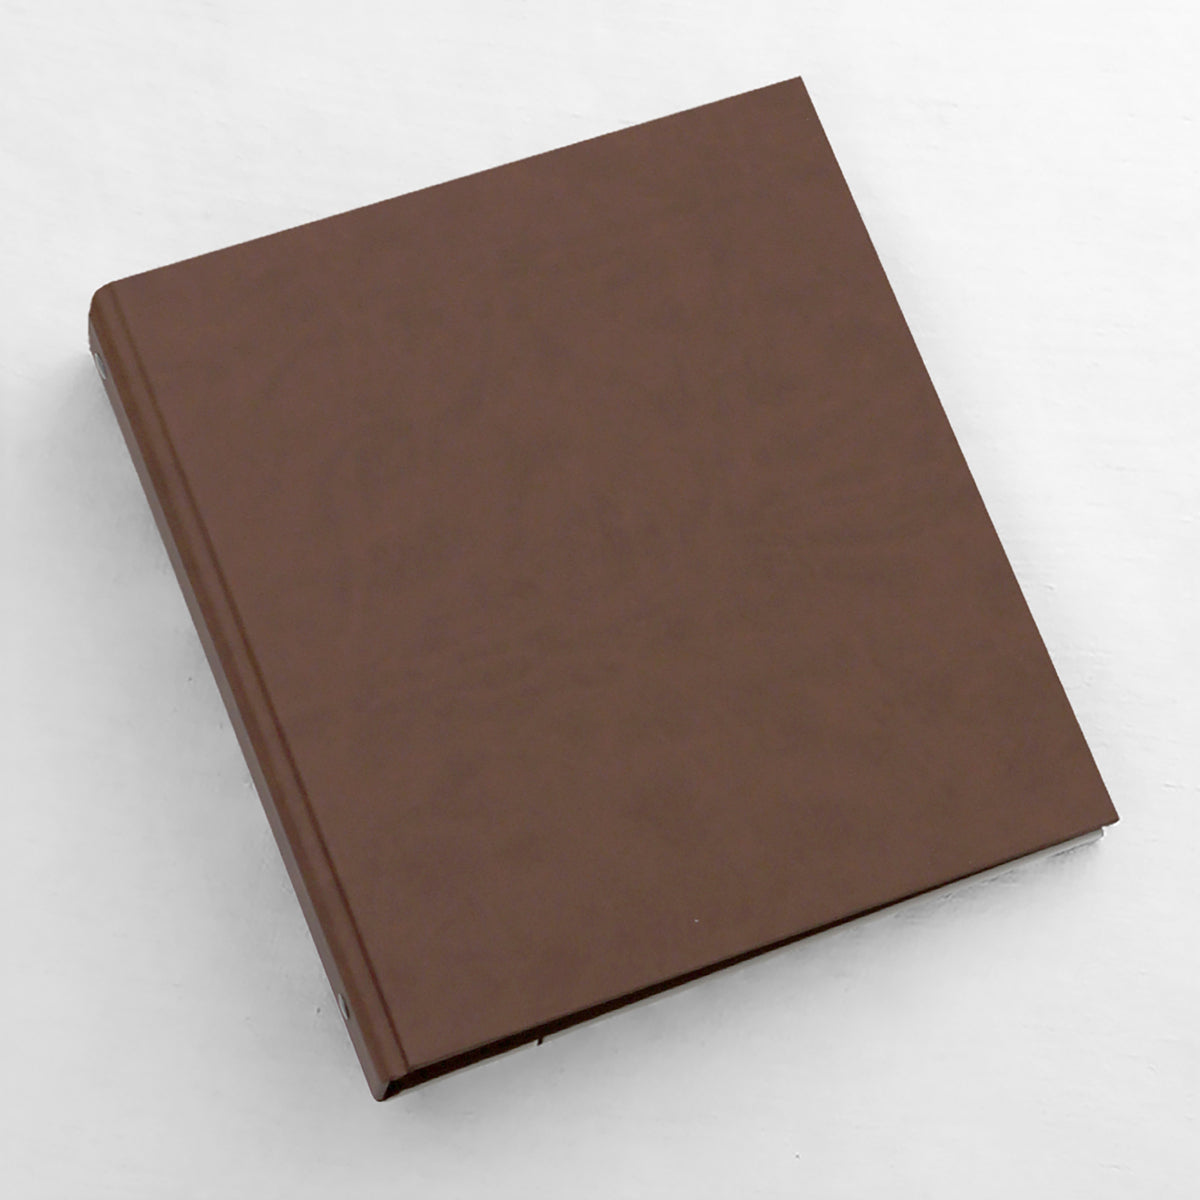 Large Photo Binder (for 4x6 photos) with Mocha Vegan Leather Cover